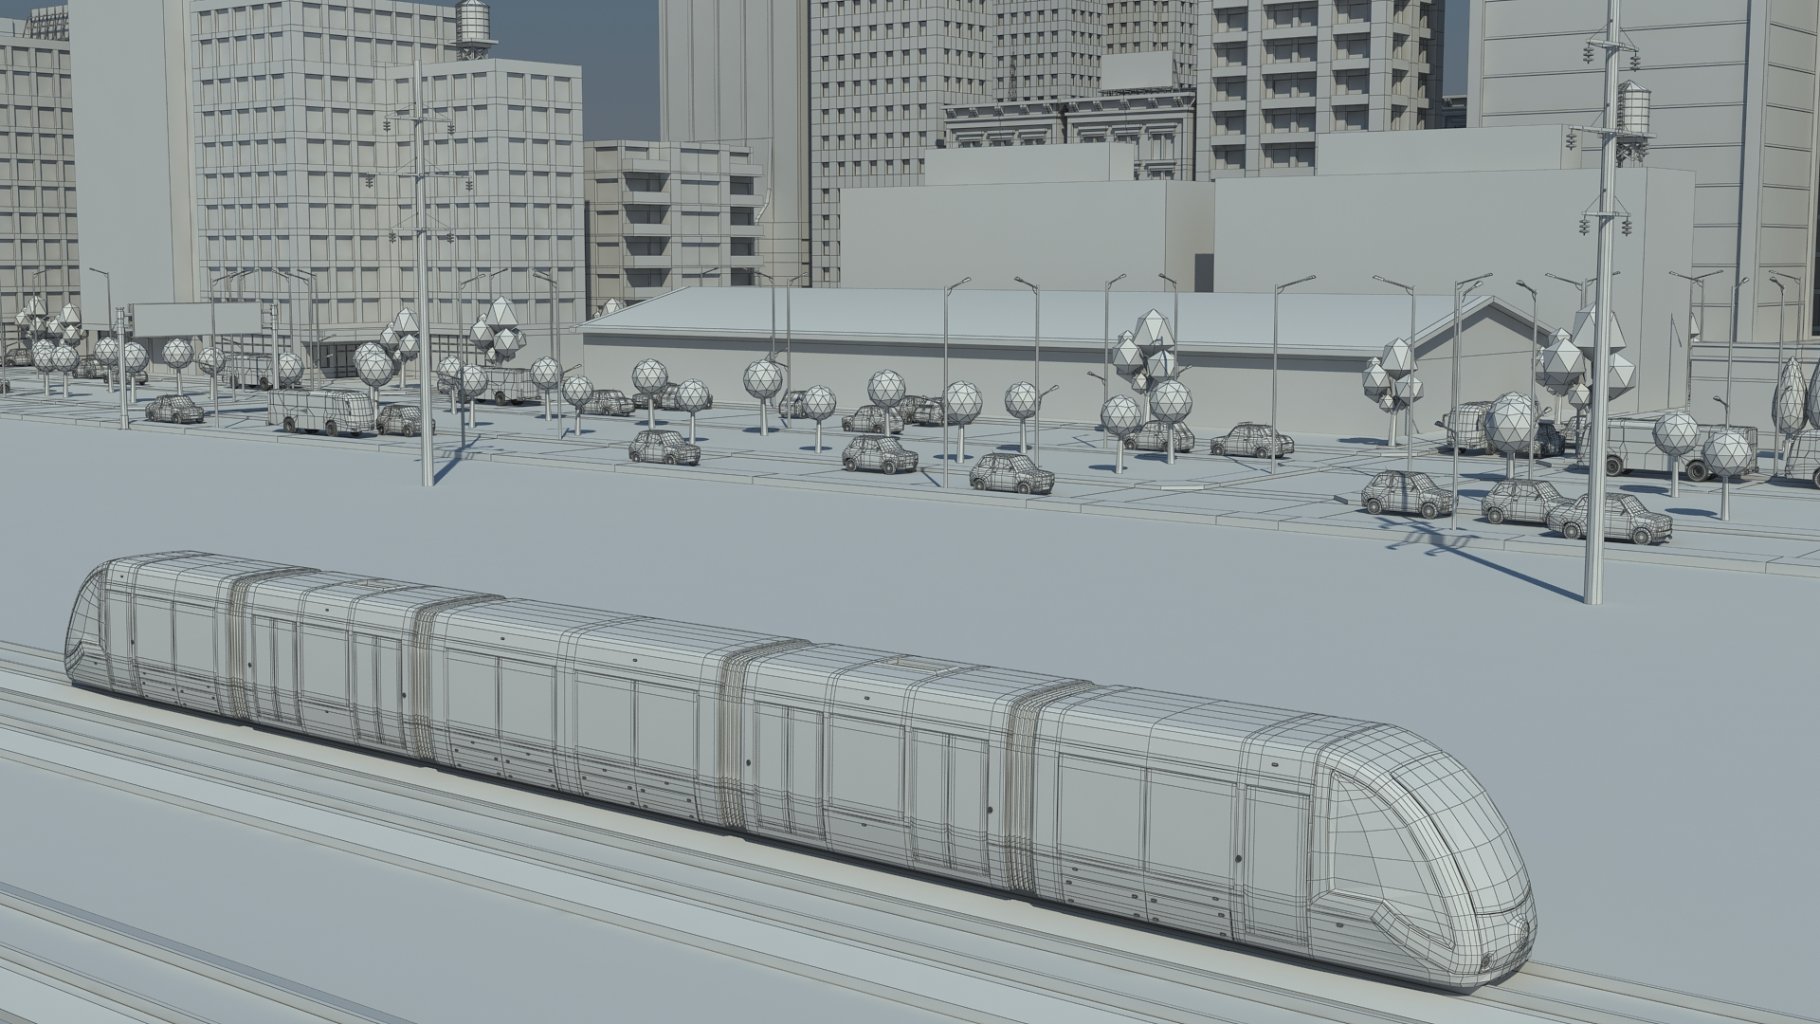 Rendering an irresistible low poly 3d train model without textures